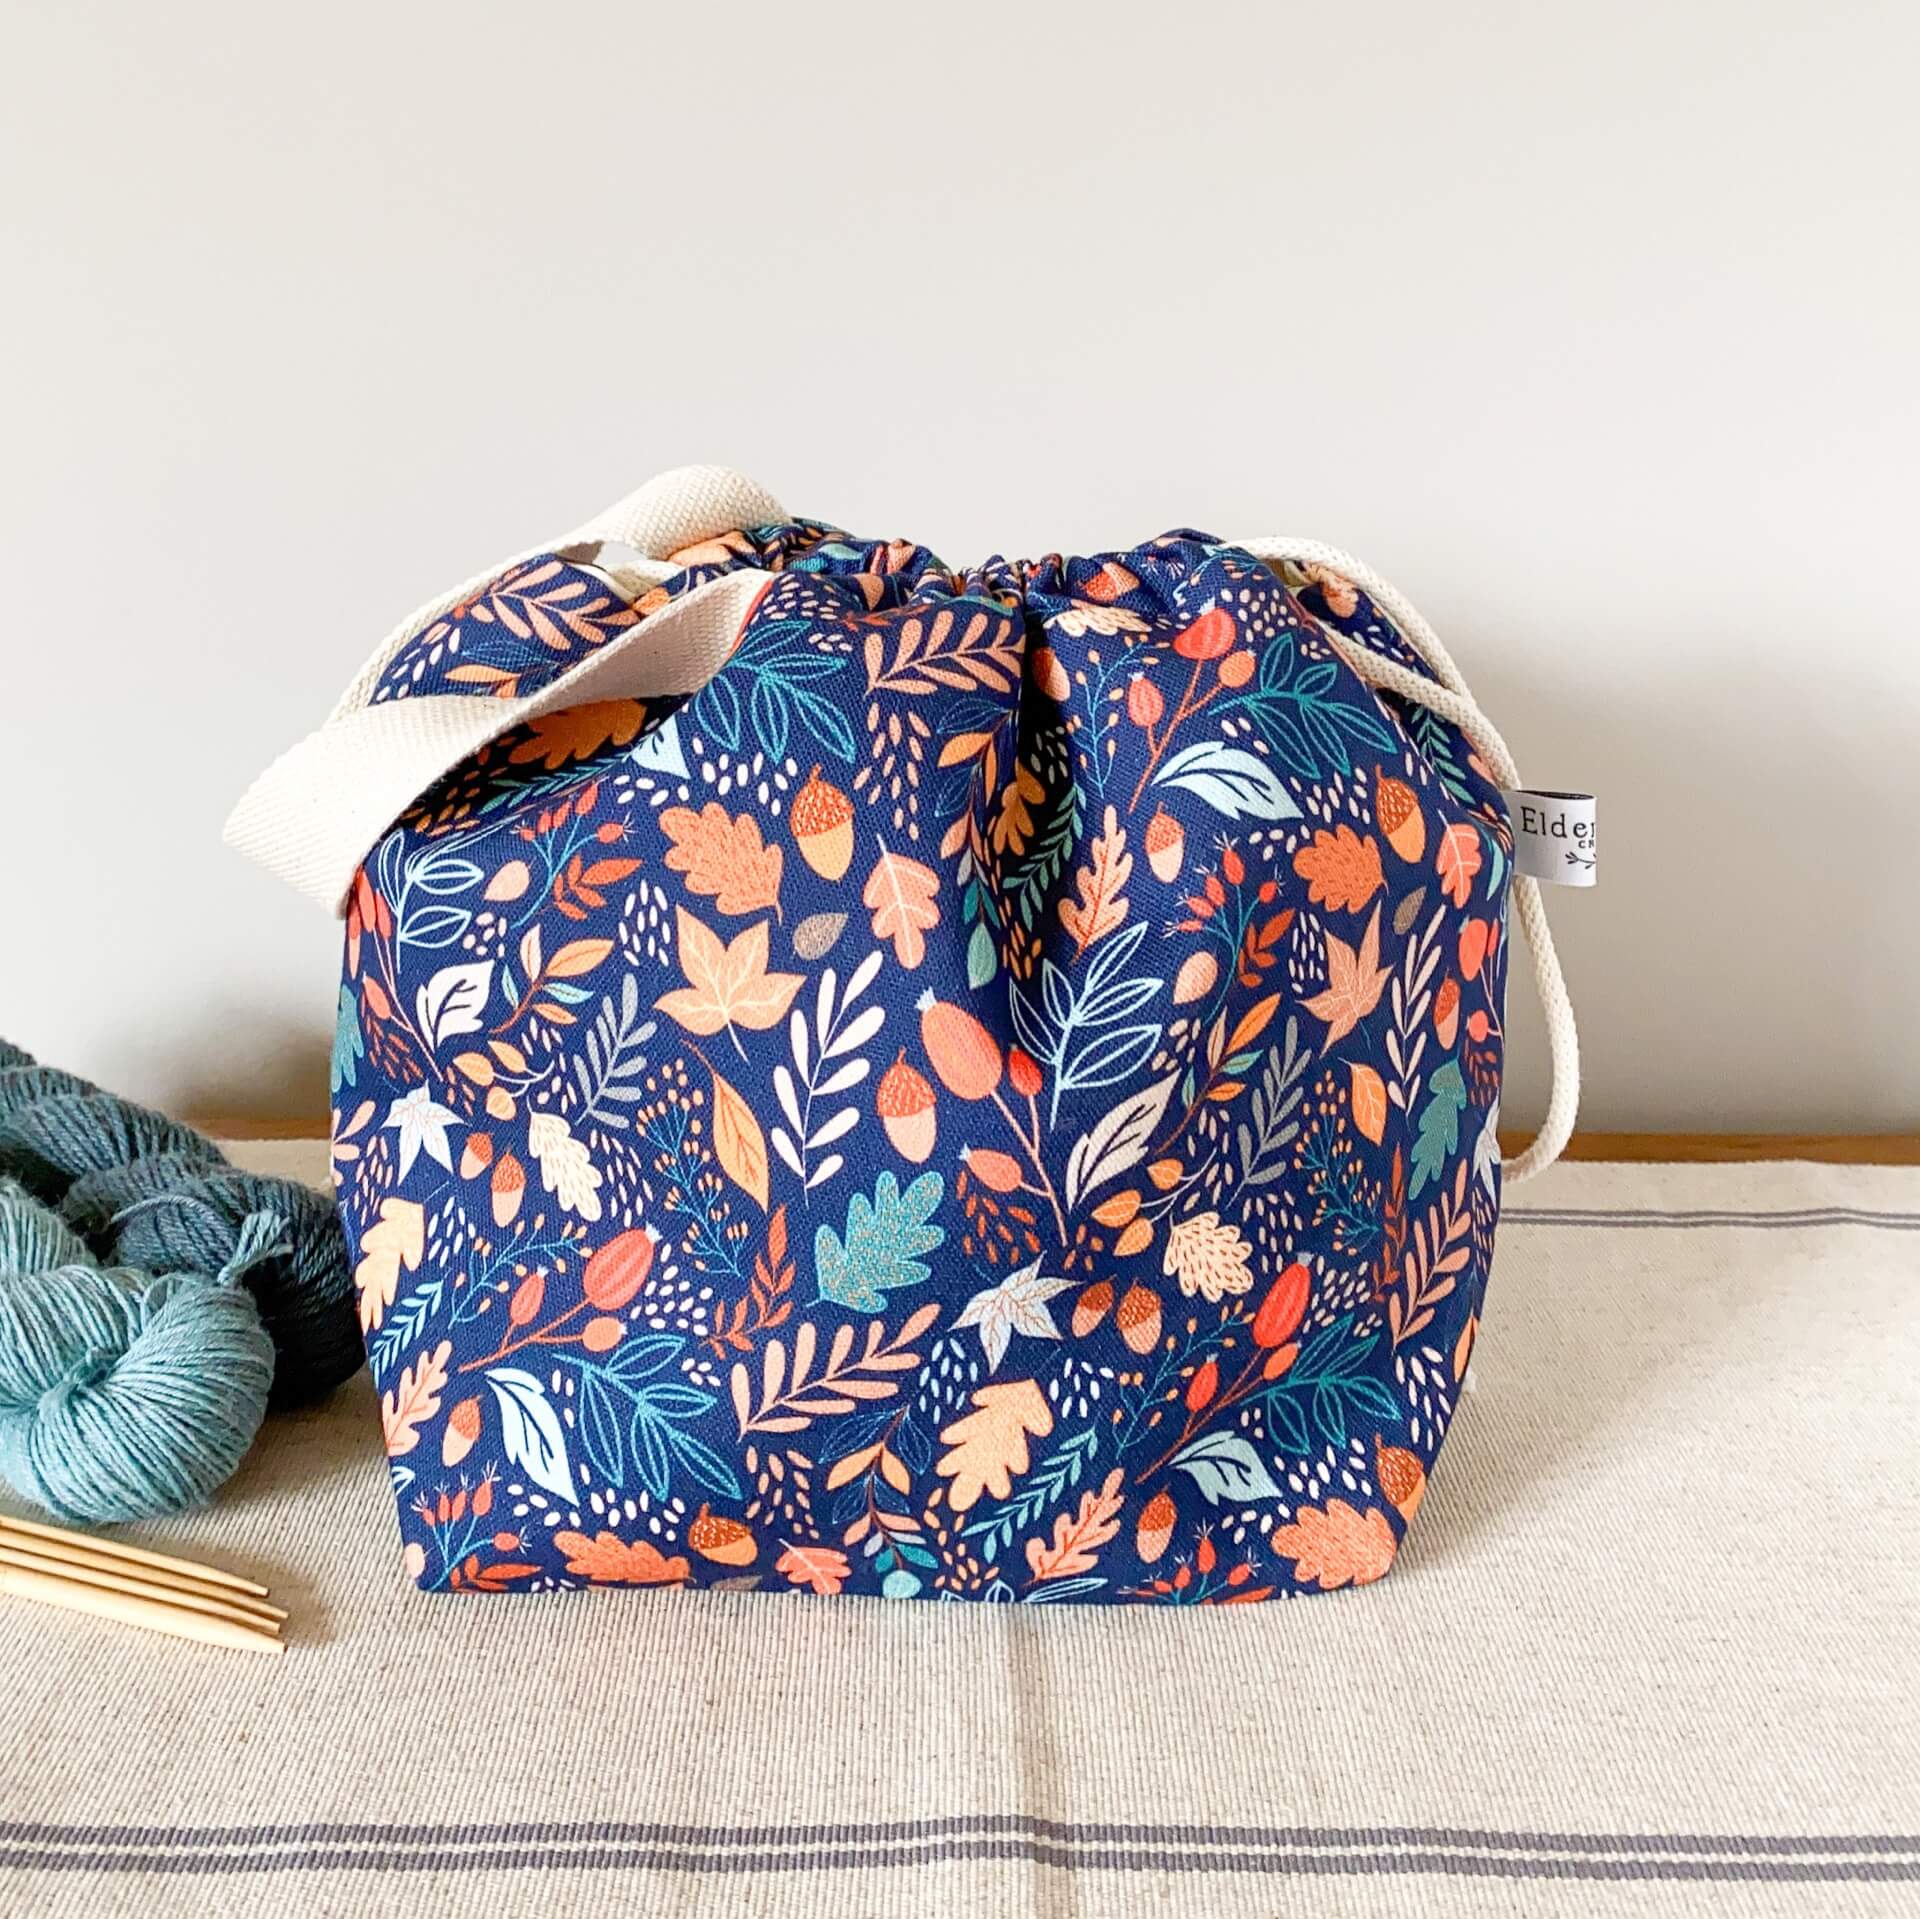 A deep blue project bag sits on a table next to two skeins of yarn. The blue fabric is printed with lots of small leaves and berries and acorns. The bag is pulled closed. 